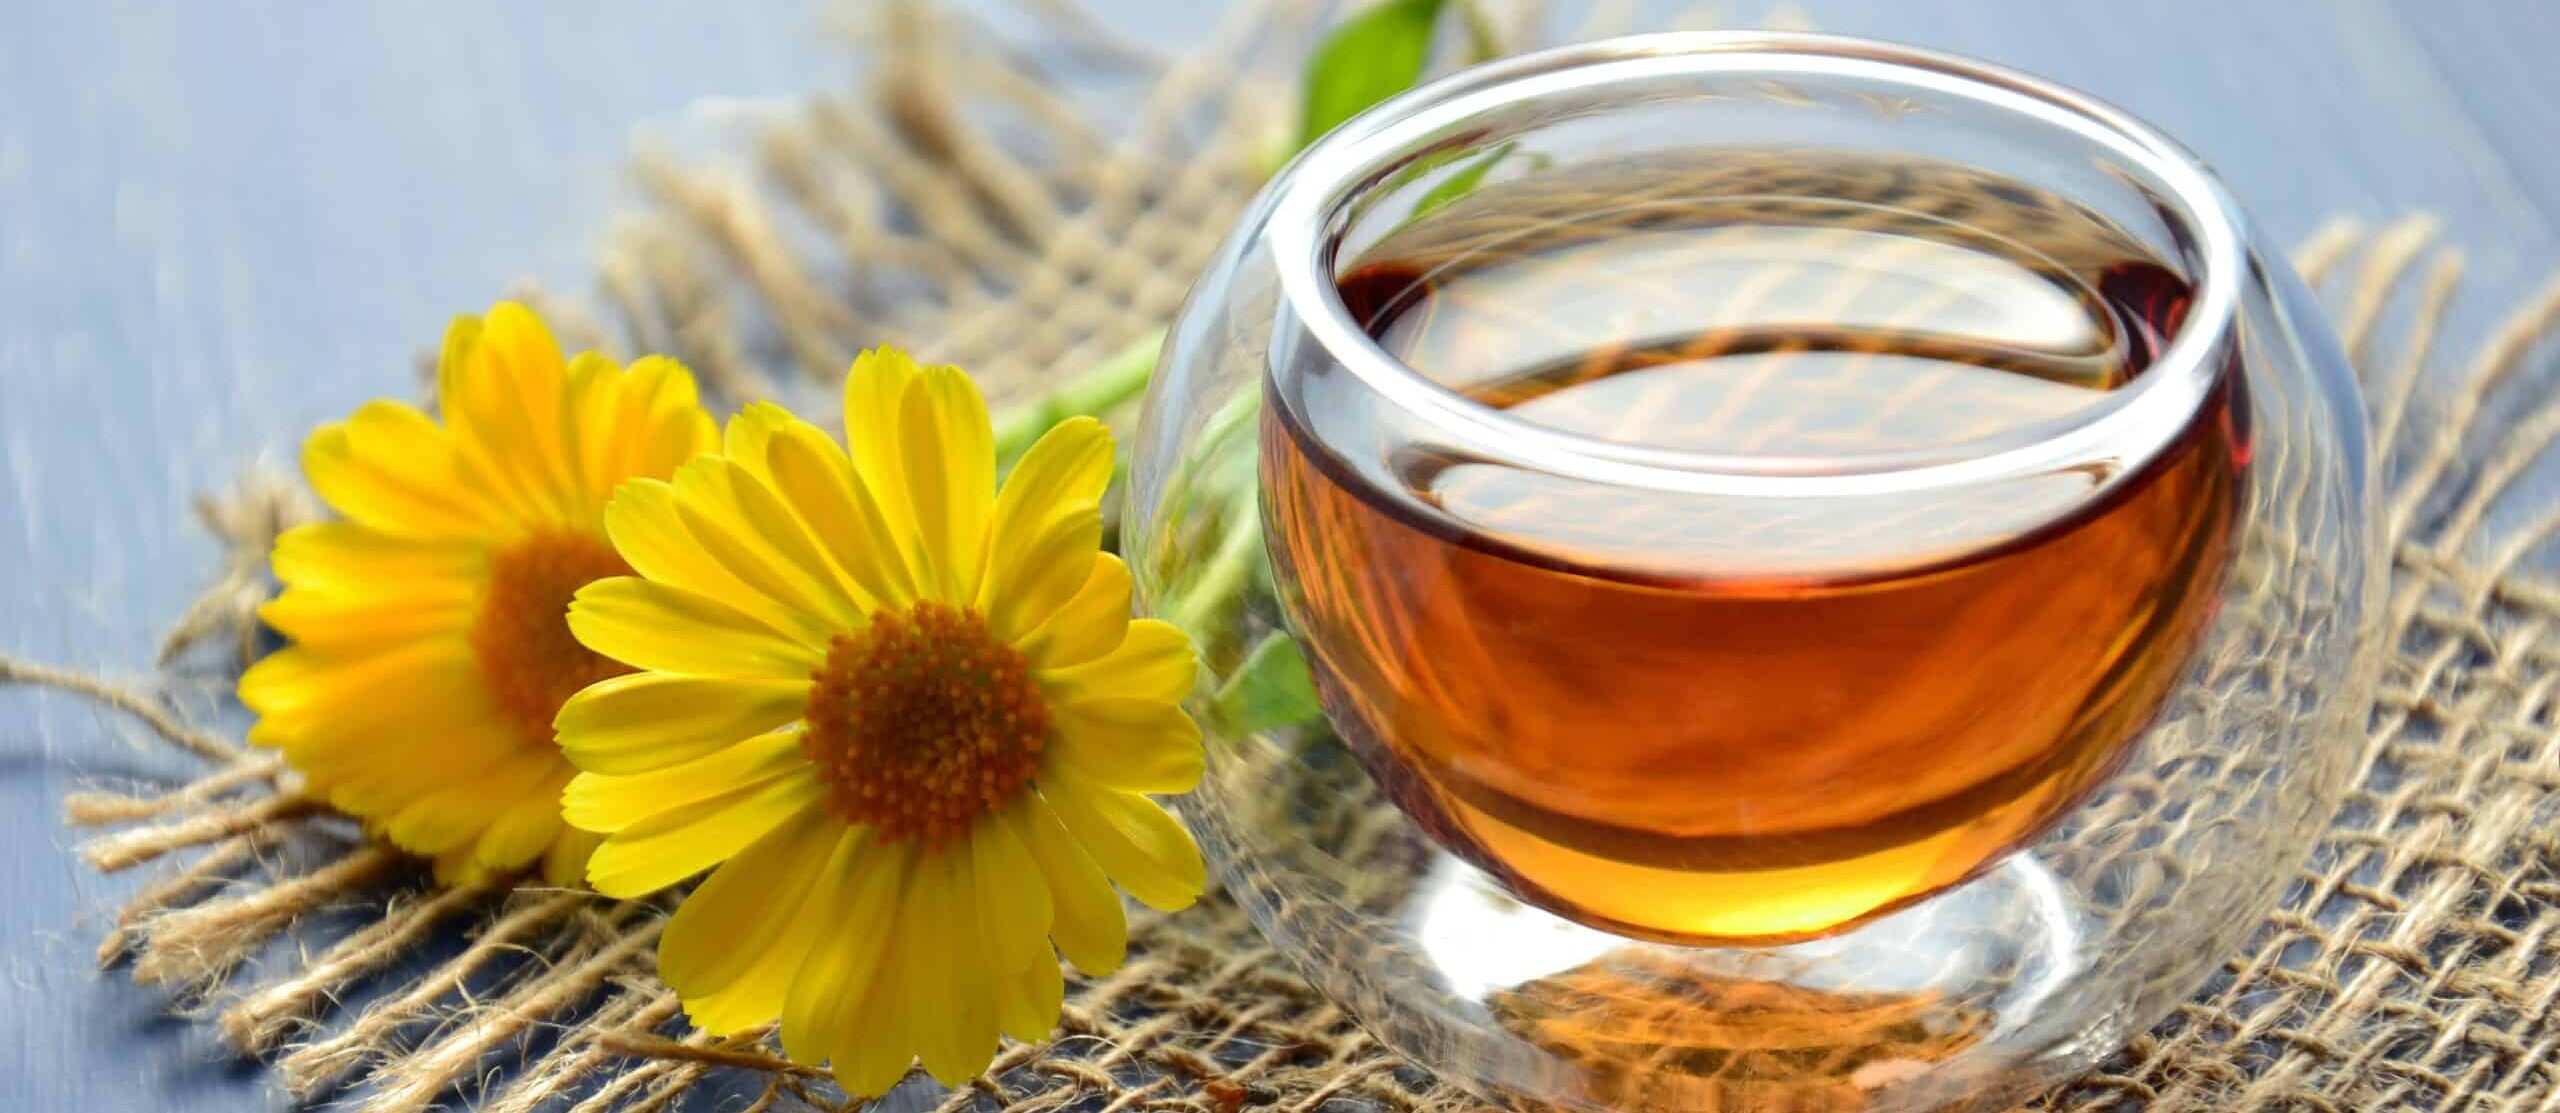 Chamomile Tea During Intermittent Fasting and Water Fasting